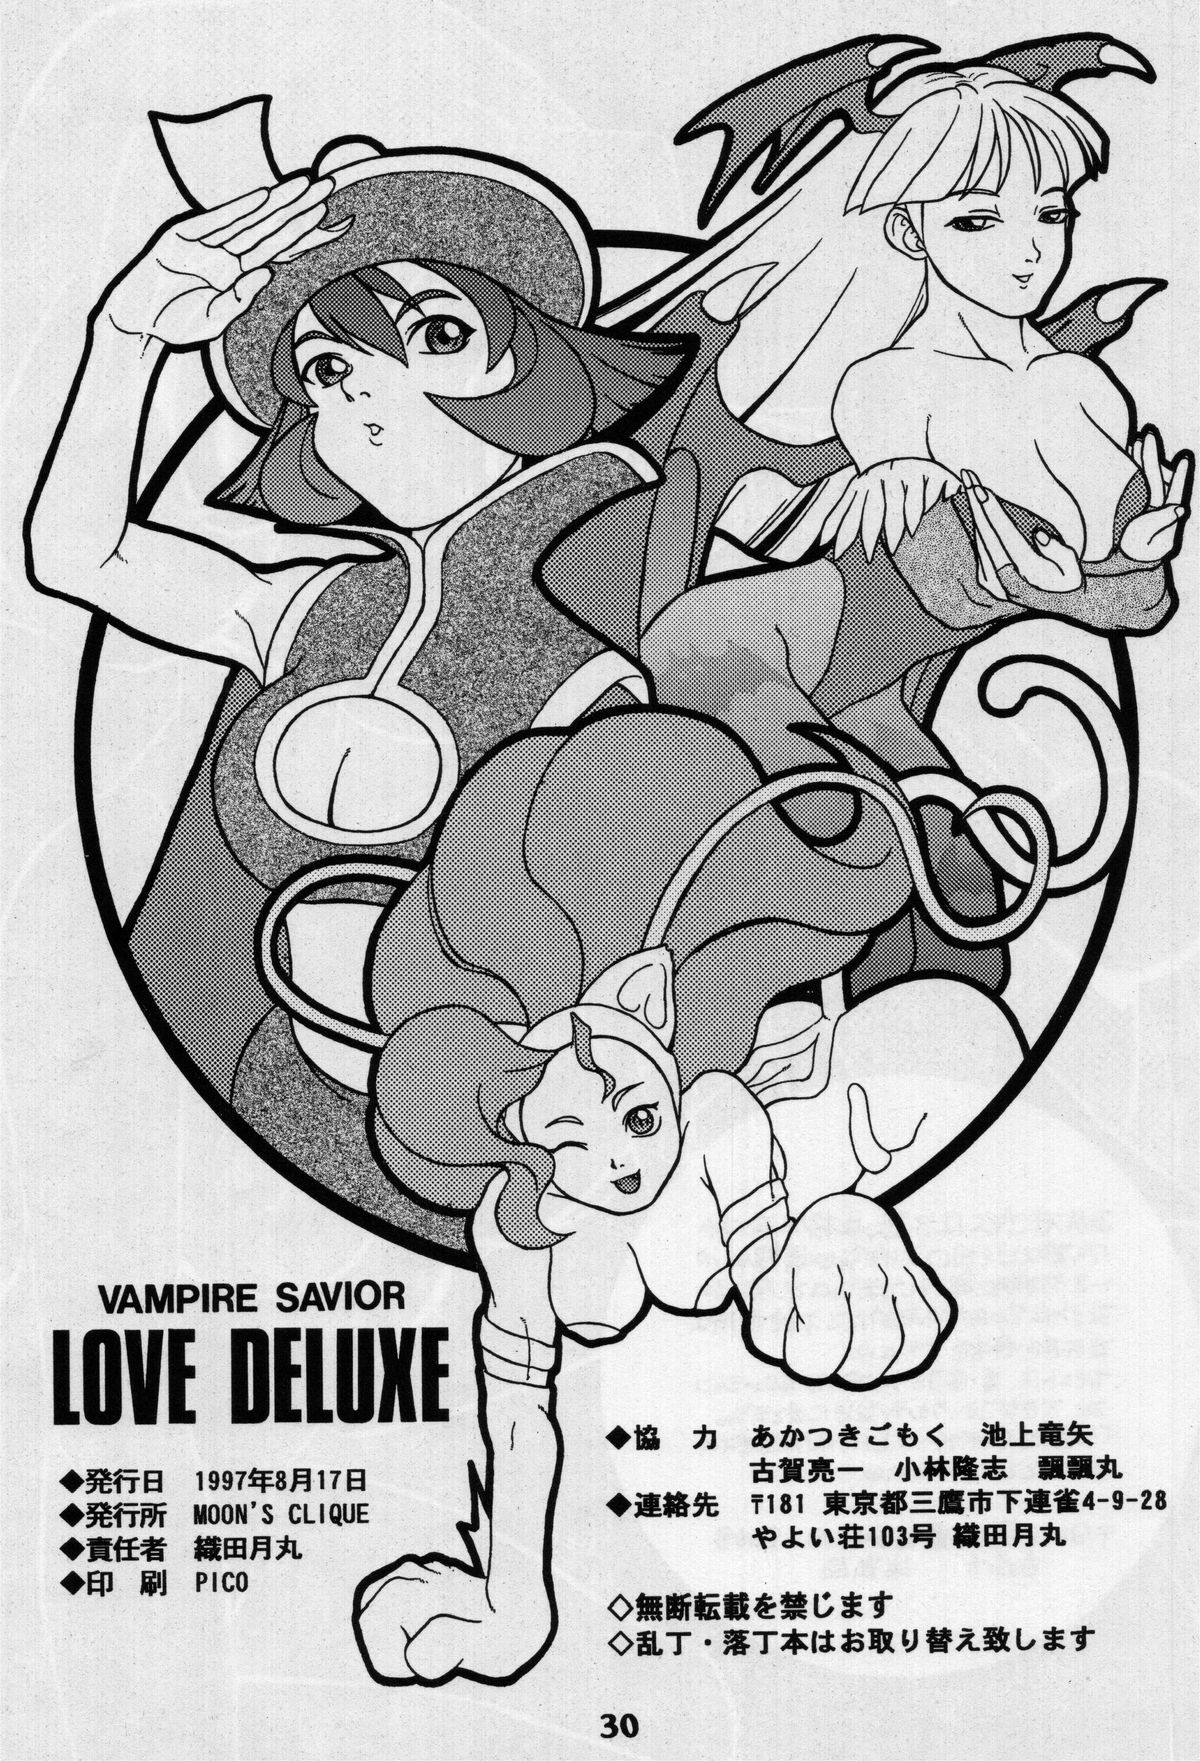 (C52) [MOON'S CLIQUE (Various)] LOVE DELUXE (Darkstalkers) page 29 full